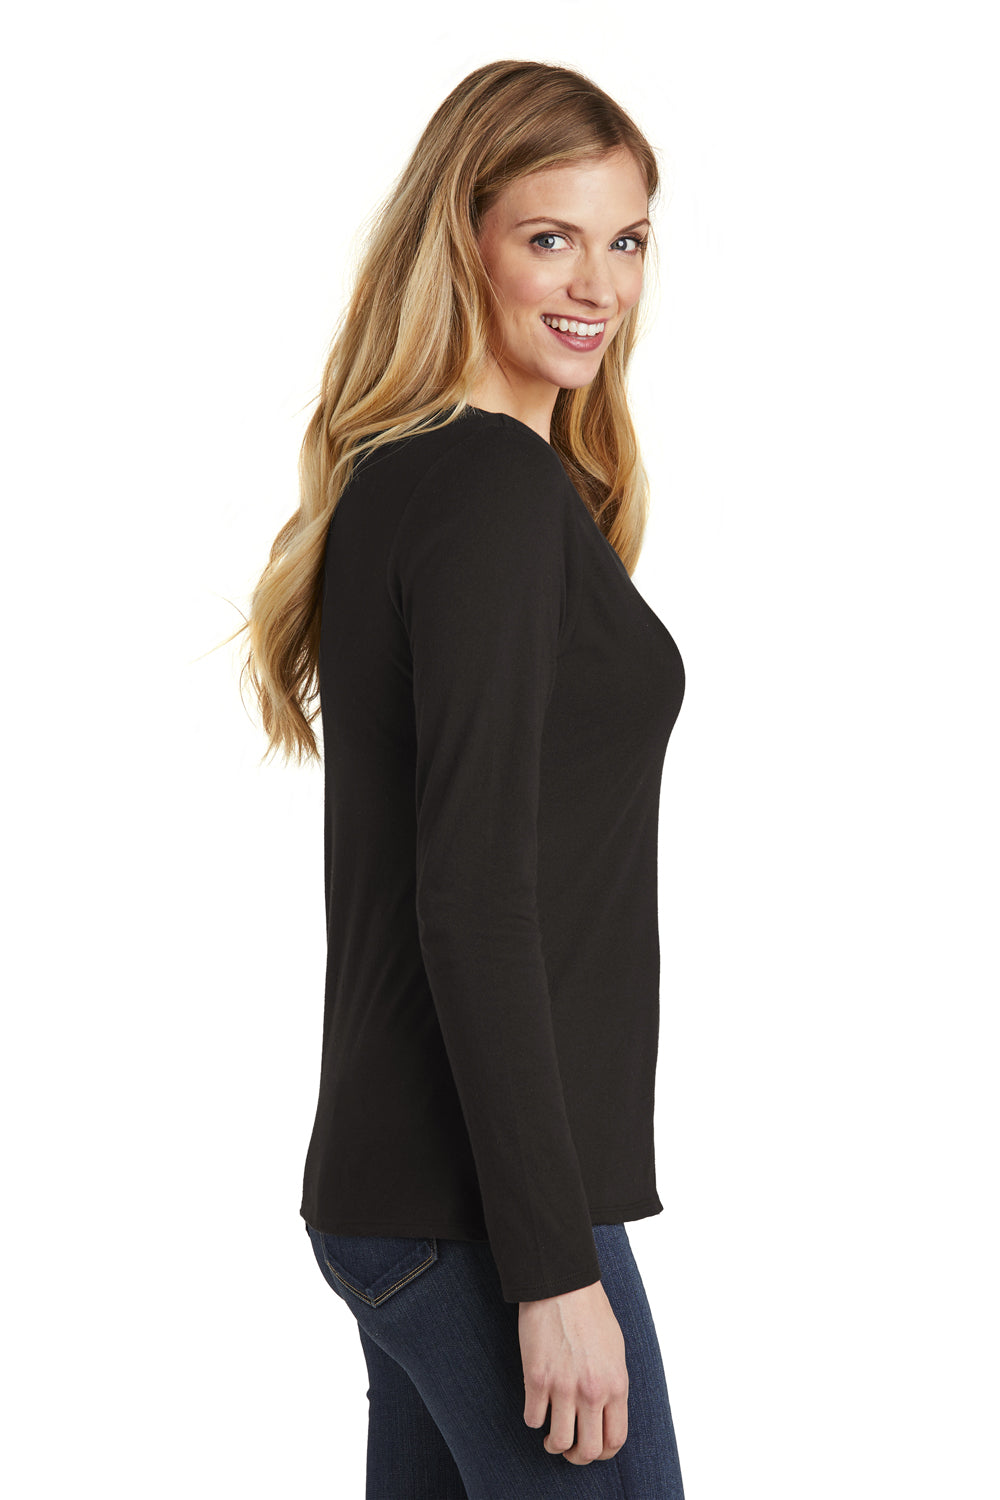 District DT6201 Womens Very Important Long Sleeve V-Neck T-Shirts Black Side